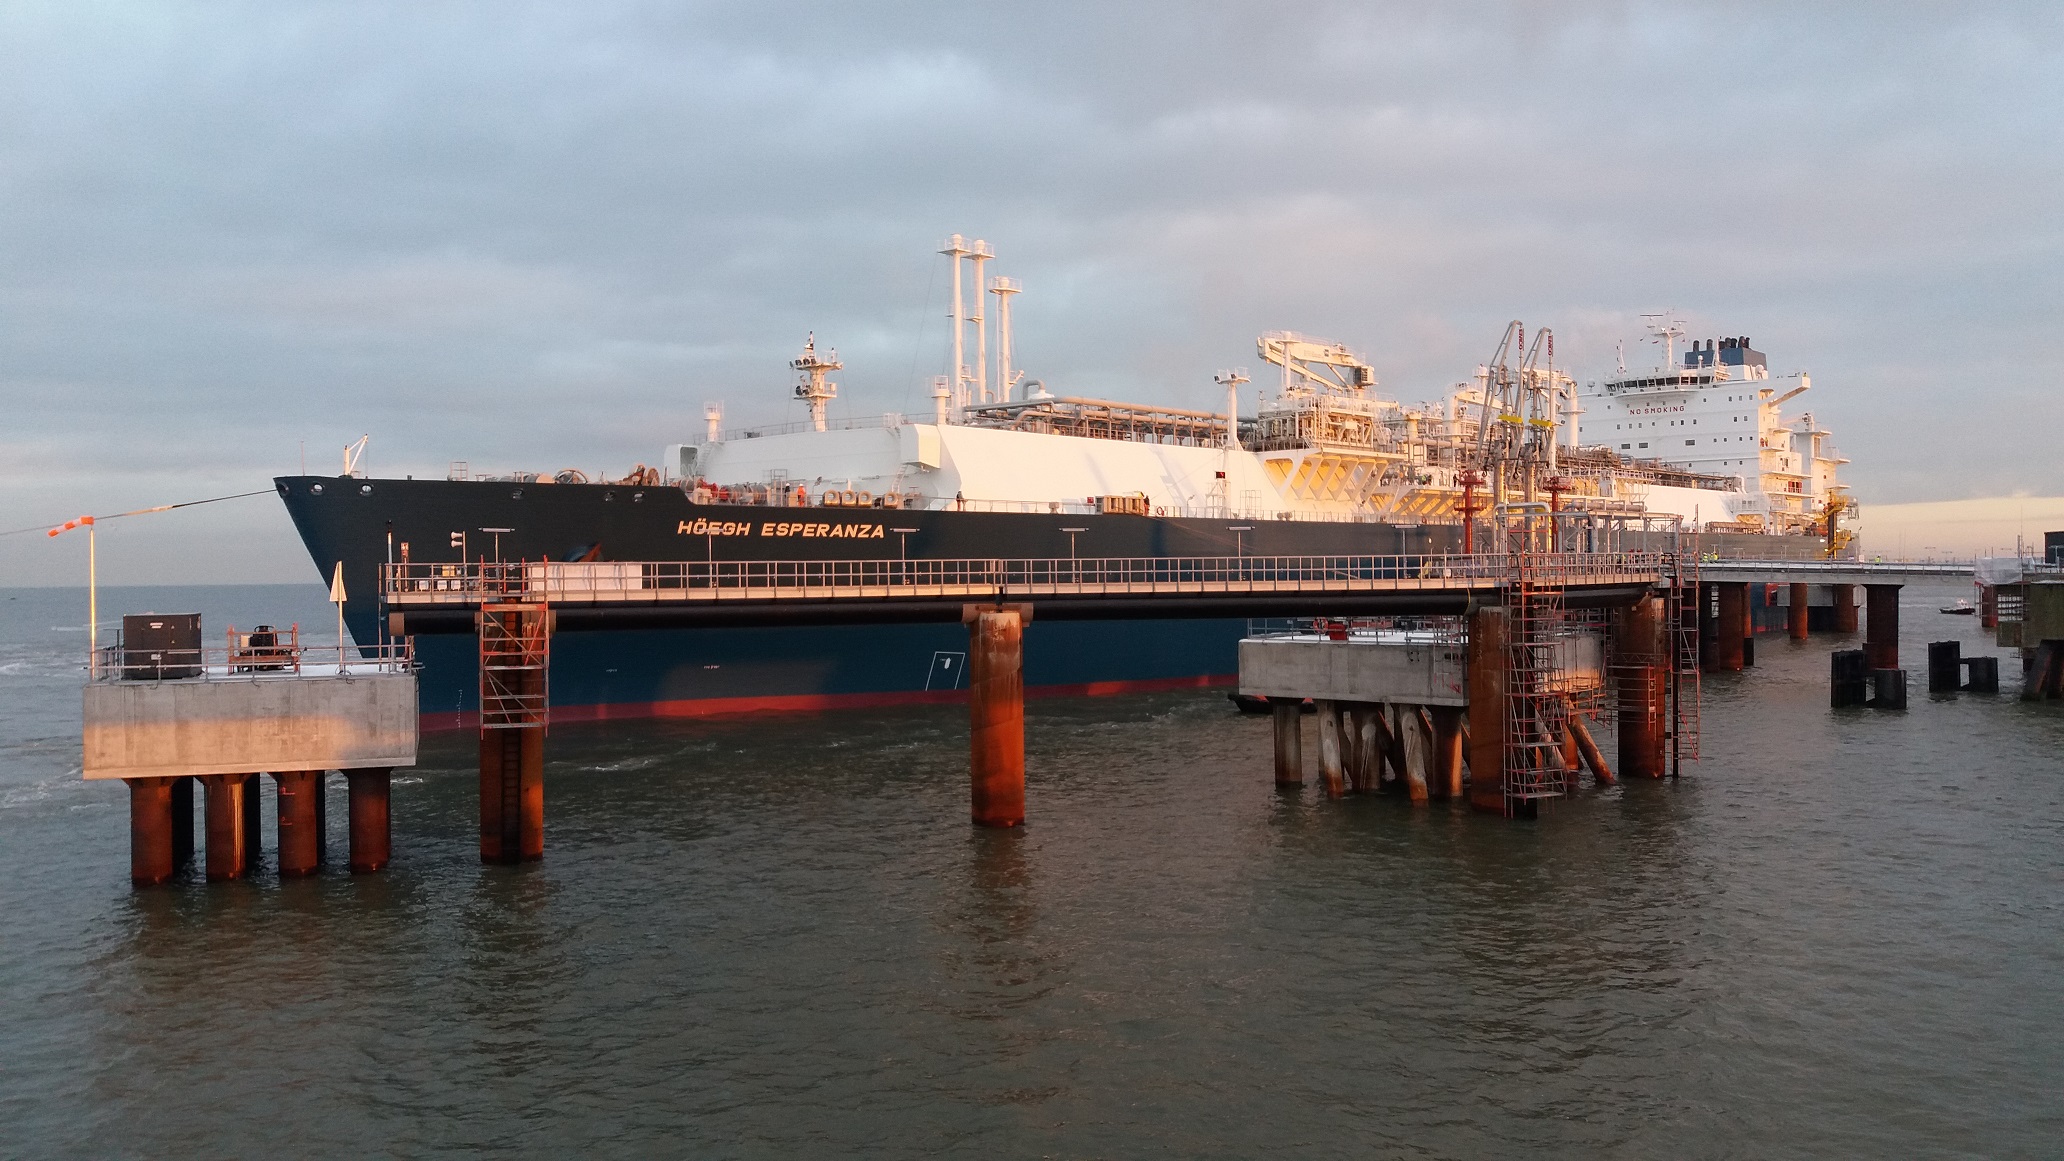 Uniper Germany's first LNG terminal received 42 cargoes this year